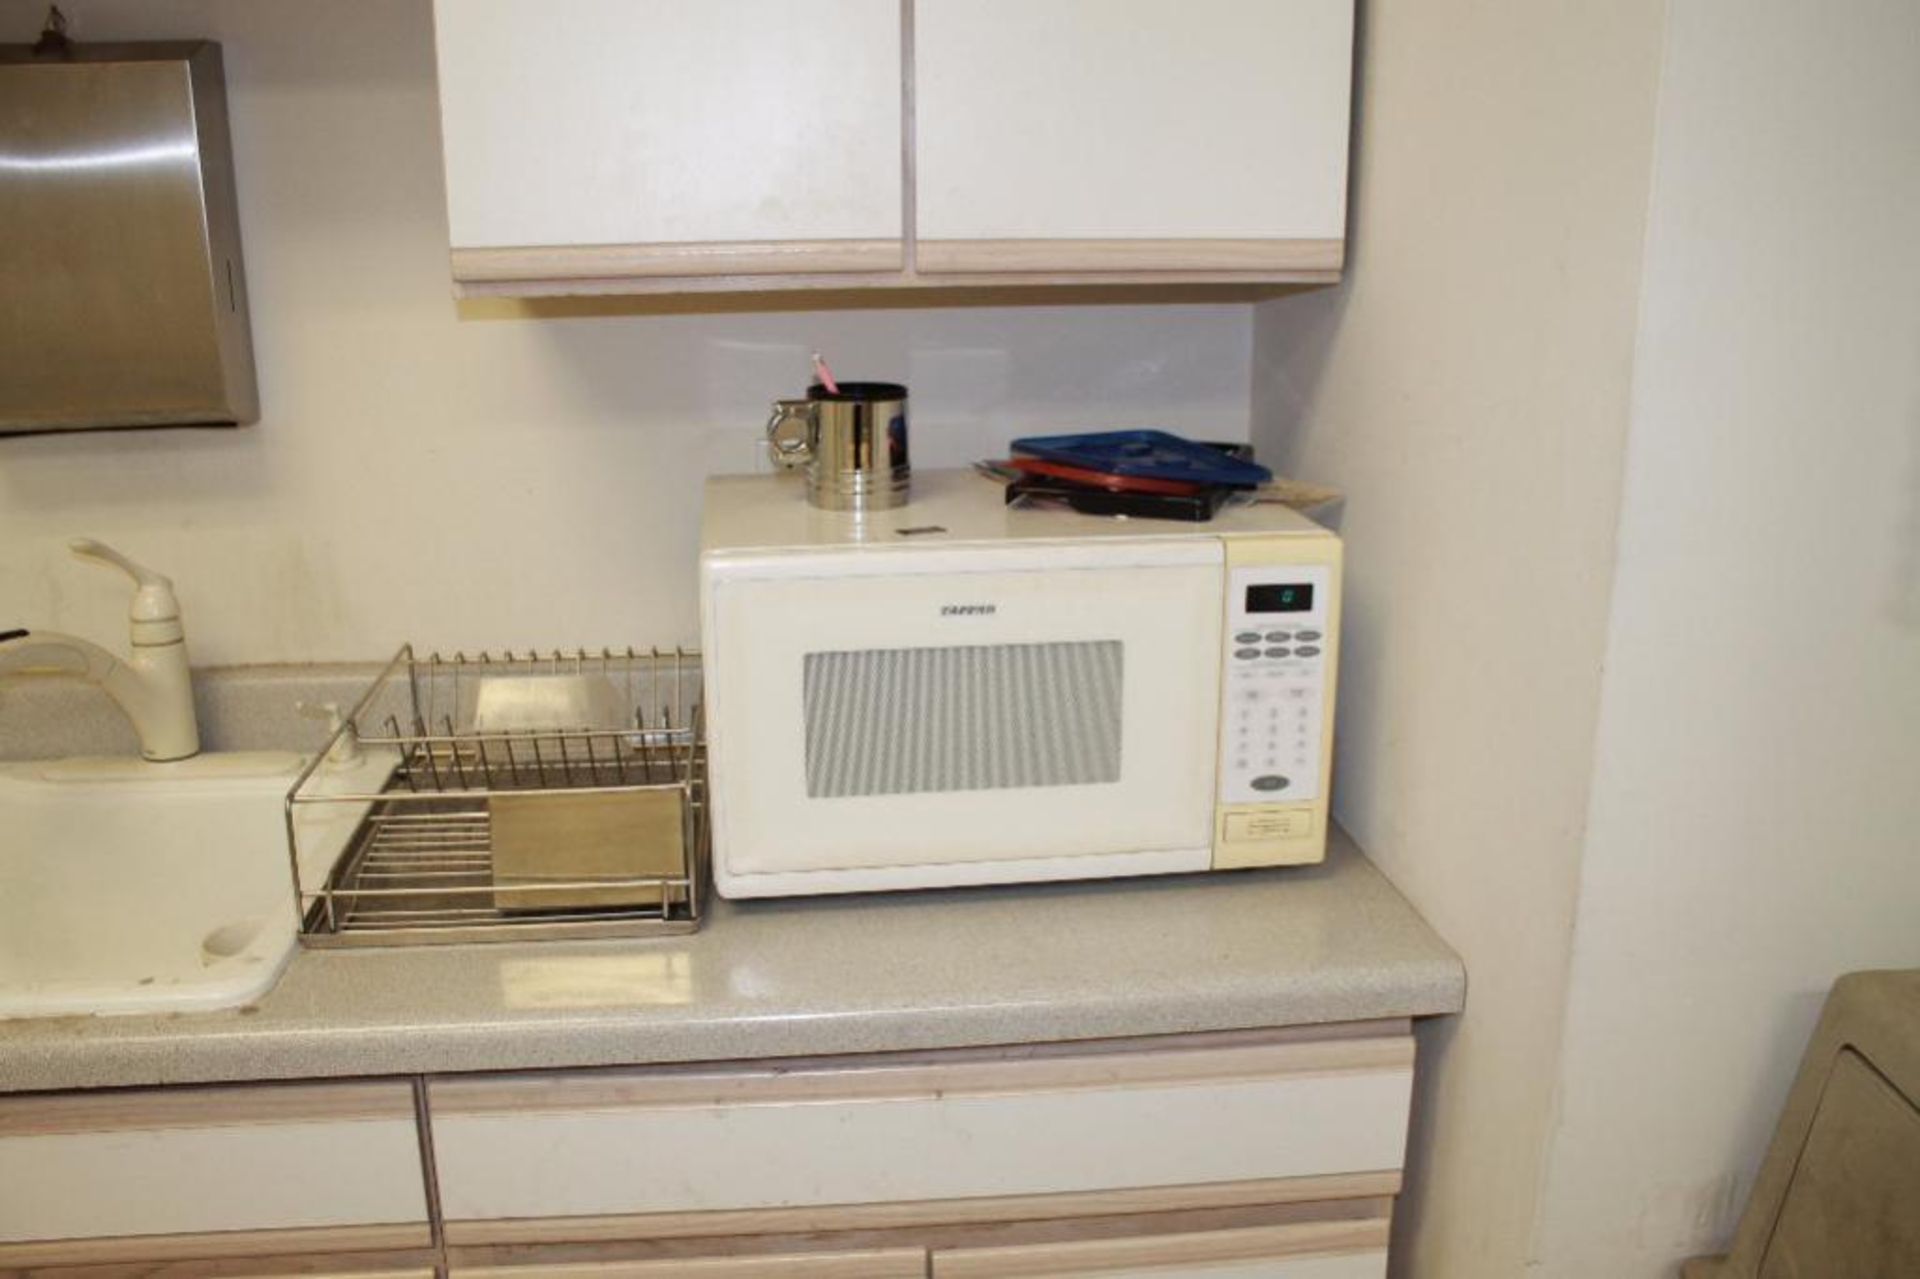 Cafeteria Table, Chairs, TV, TV Mount, Refrigerator, Microwave - Image 3 of 3